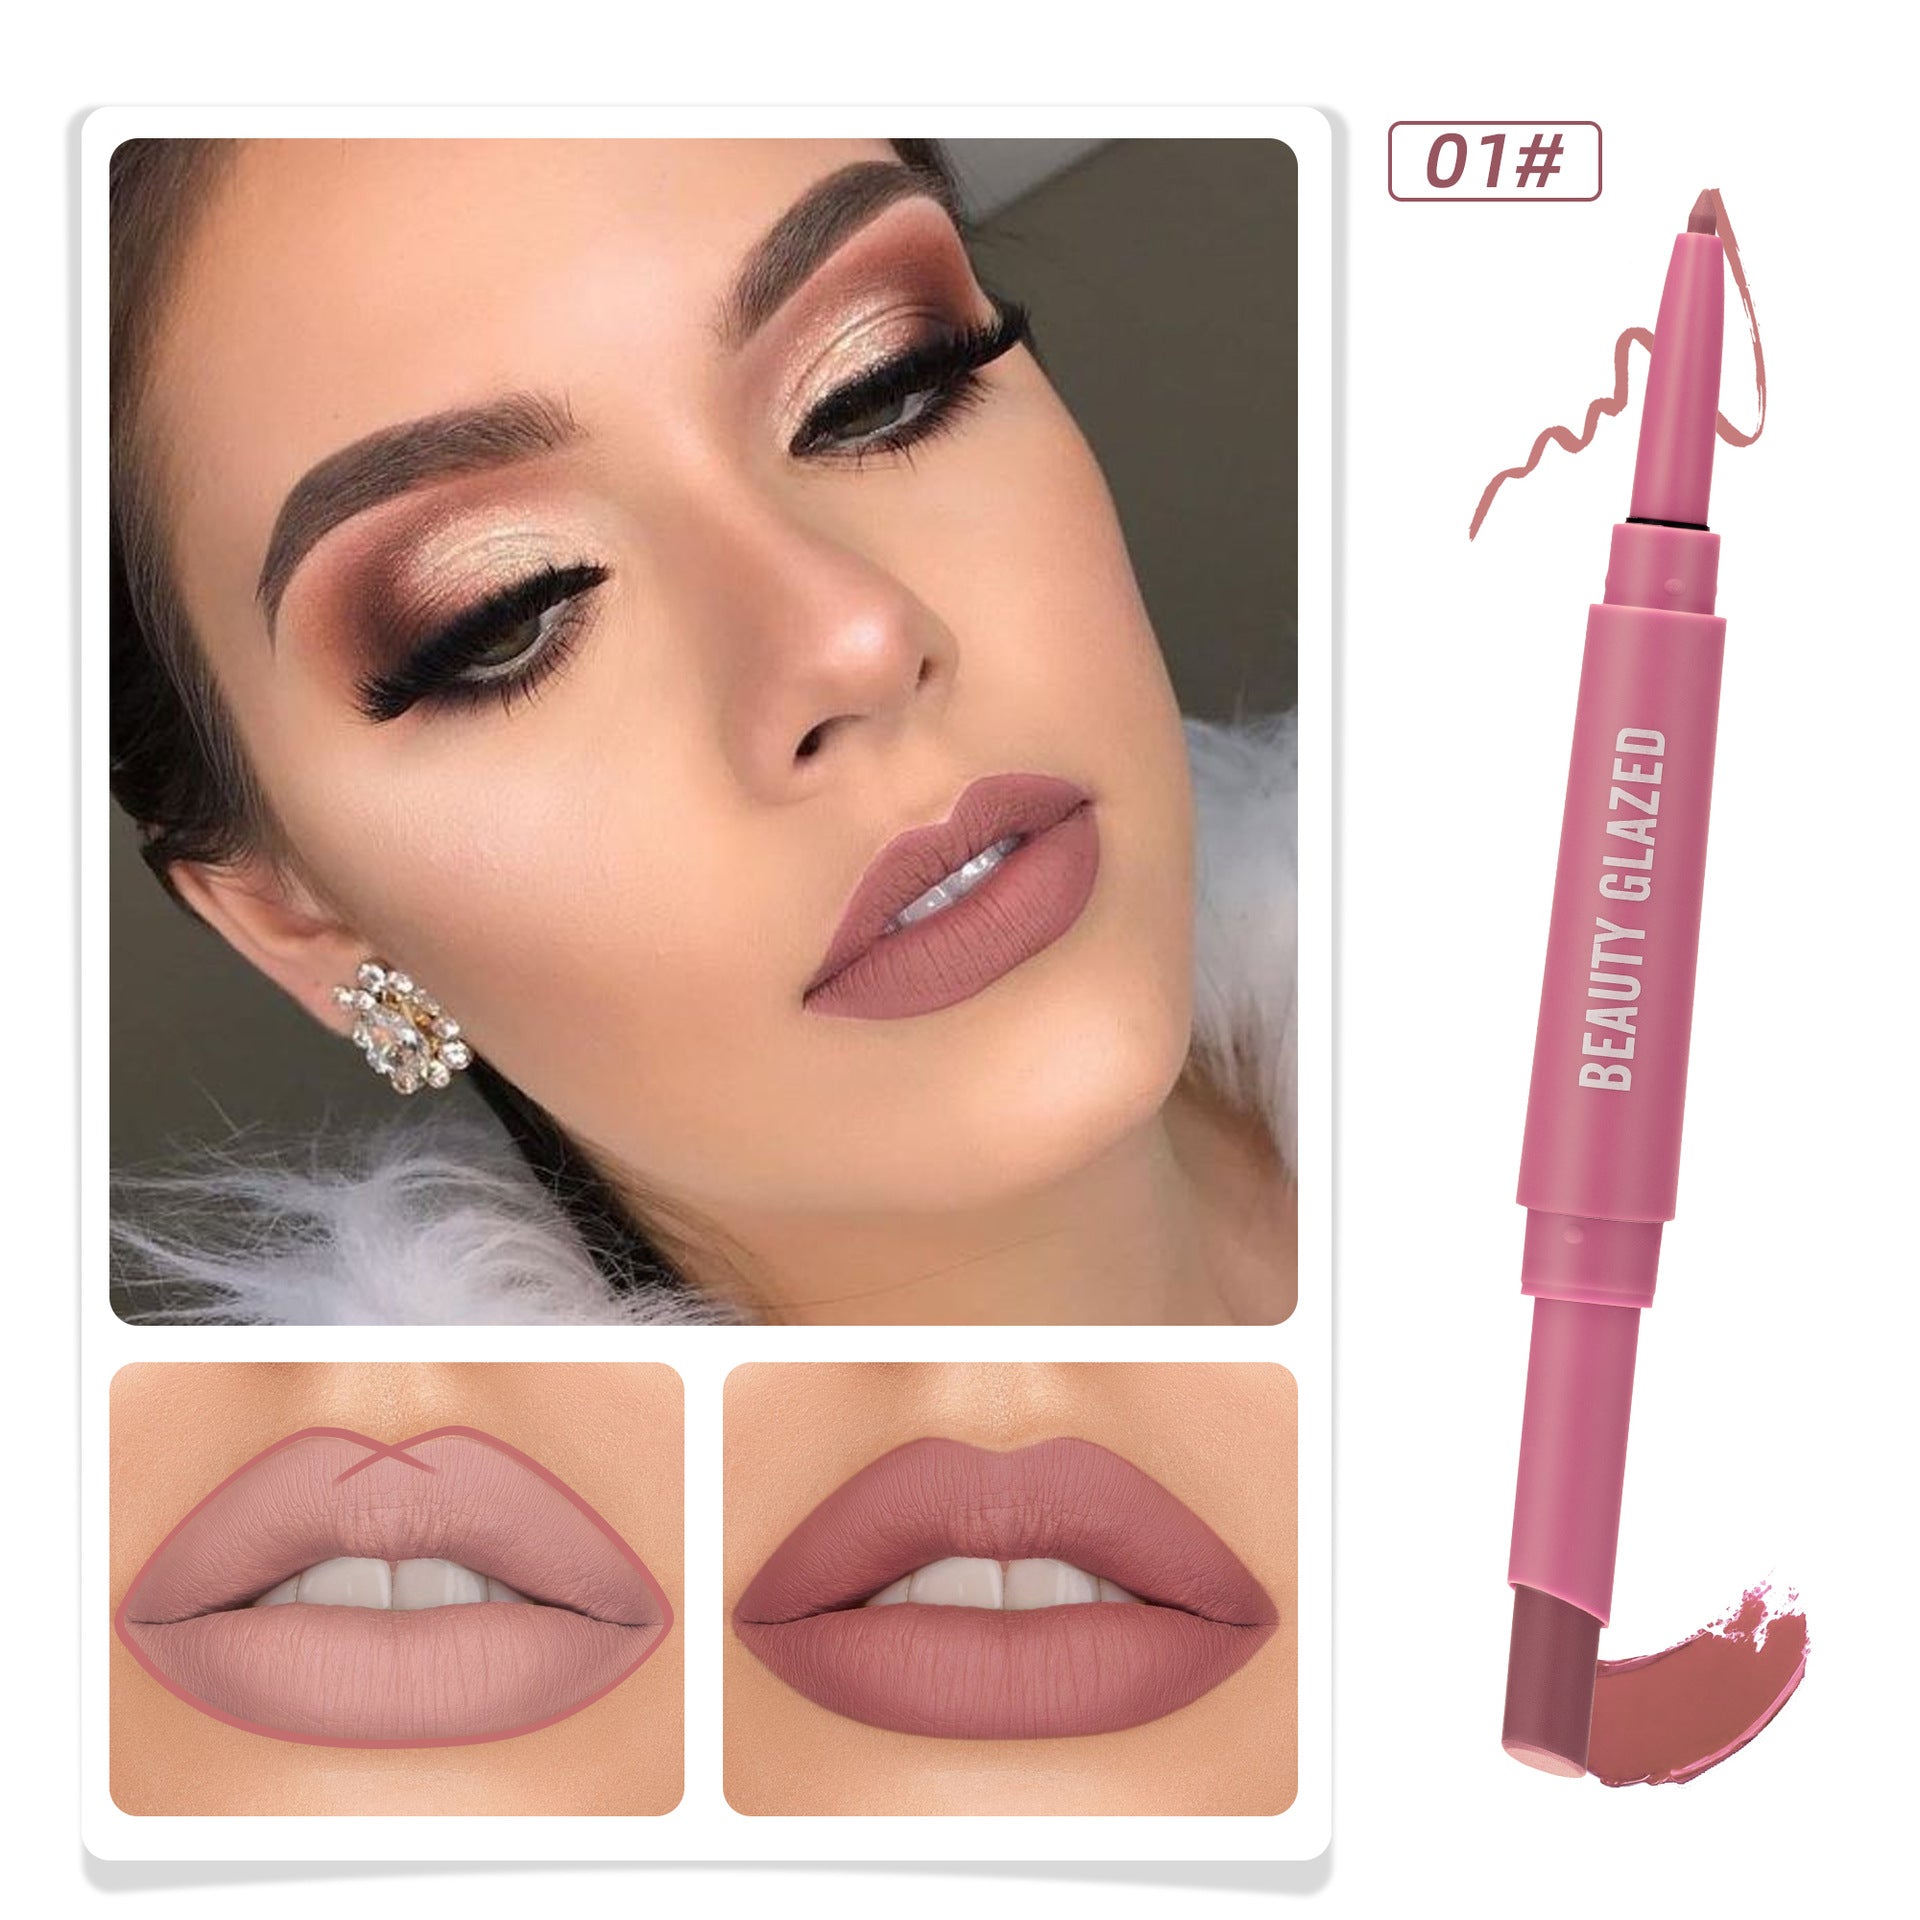 Double-Headed Matte Lipstick & Lip Liner Set: No Stain, Long Lasting, Smooth Application LA ROSE BEAUTY